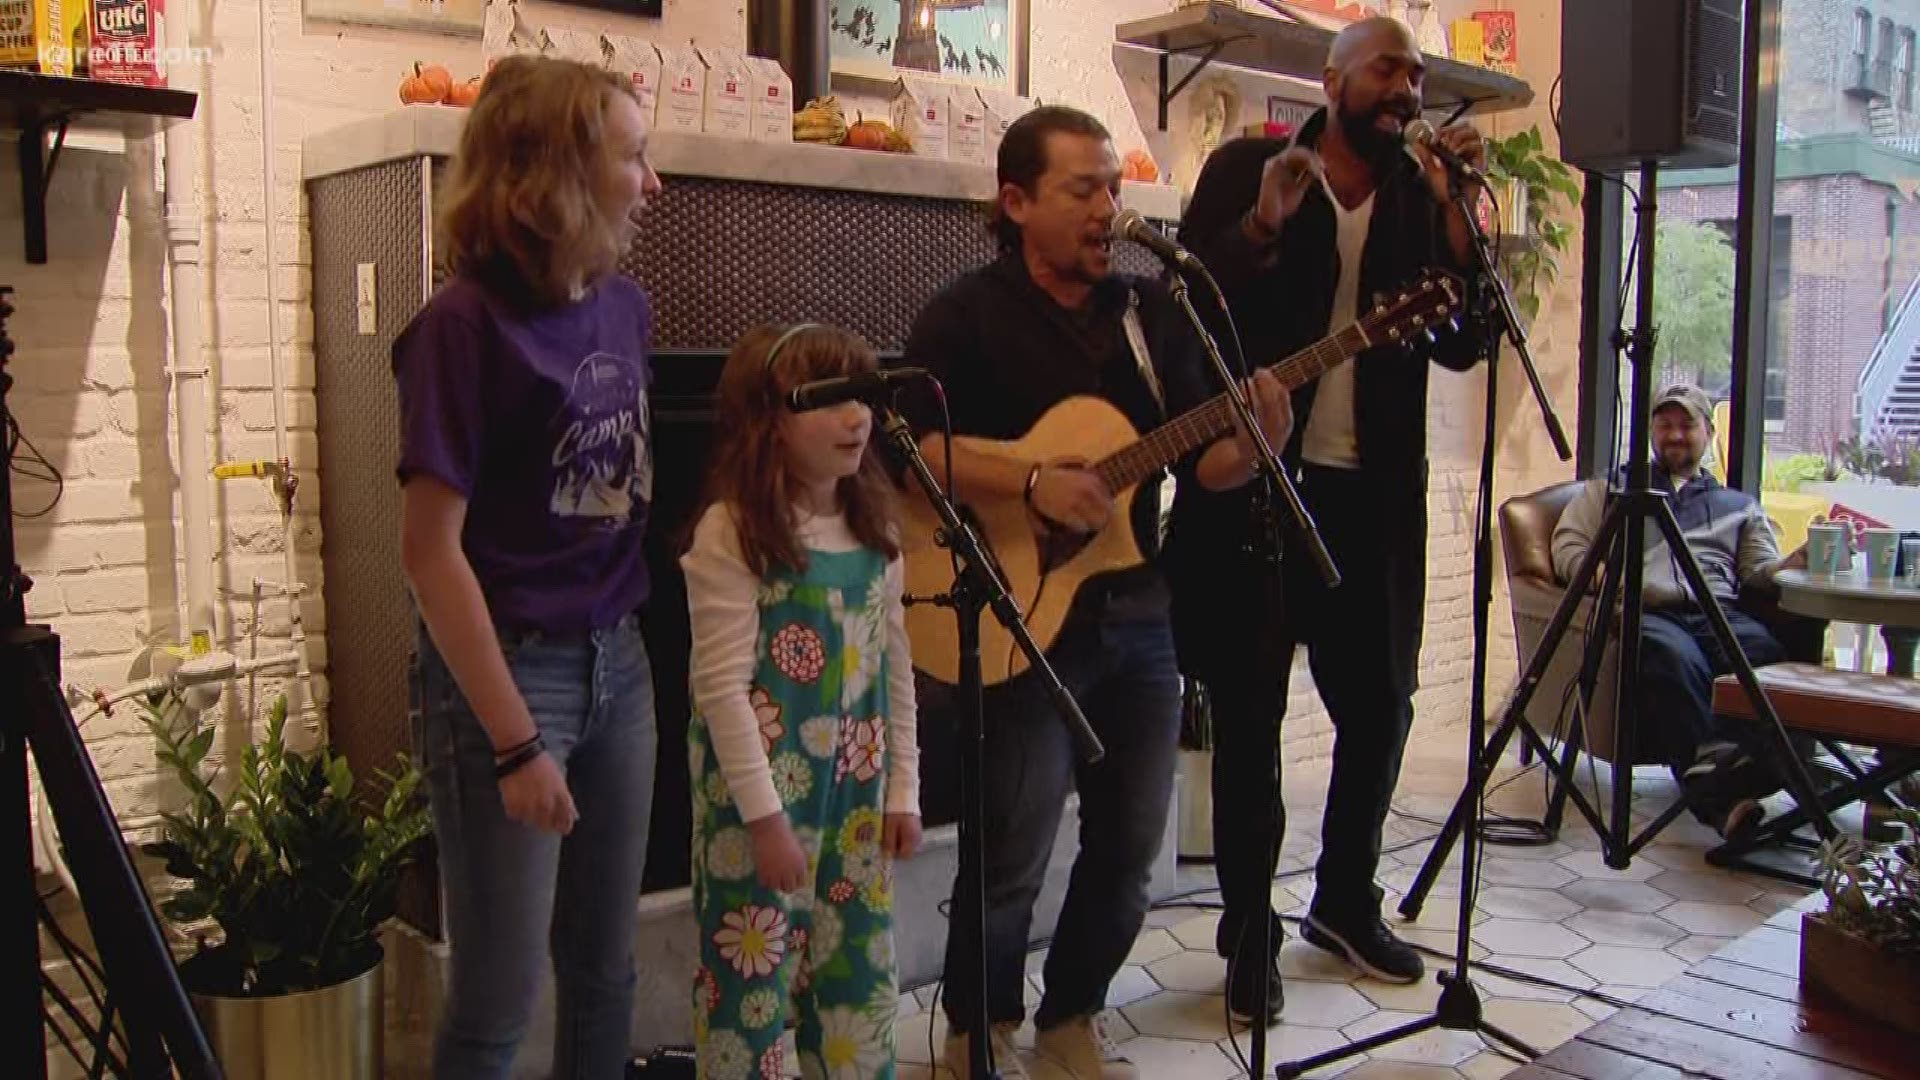 "Hamilton" stars Miguel Cervantes and Nik Walker performed at Fairgrounds Coffee & Tea in Minneapolis on Monday to raise money and awareness for epilepsy.